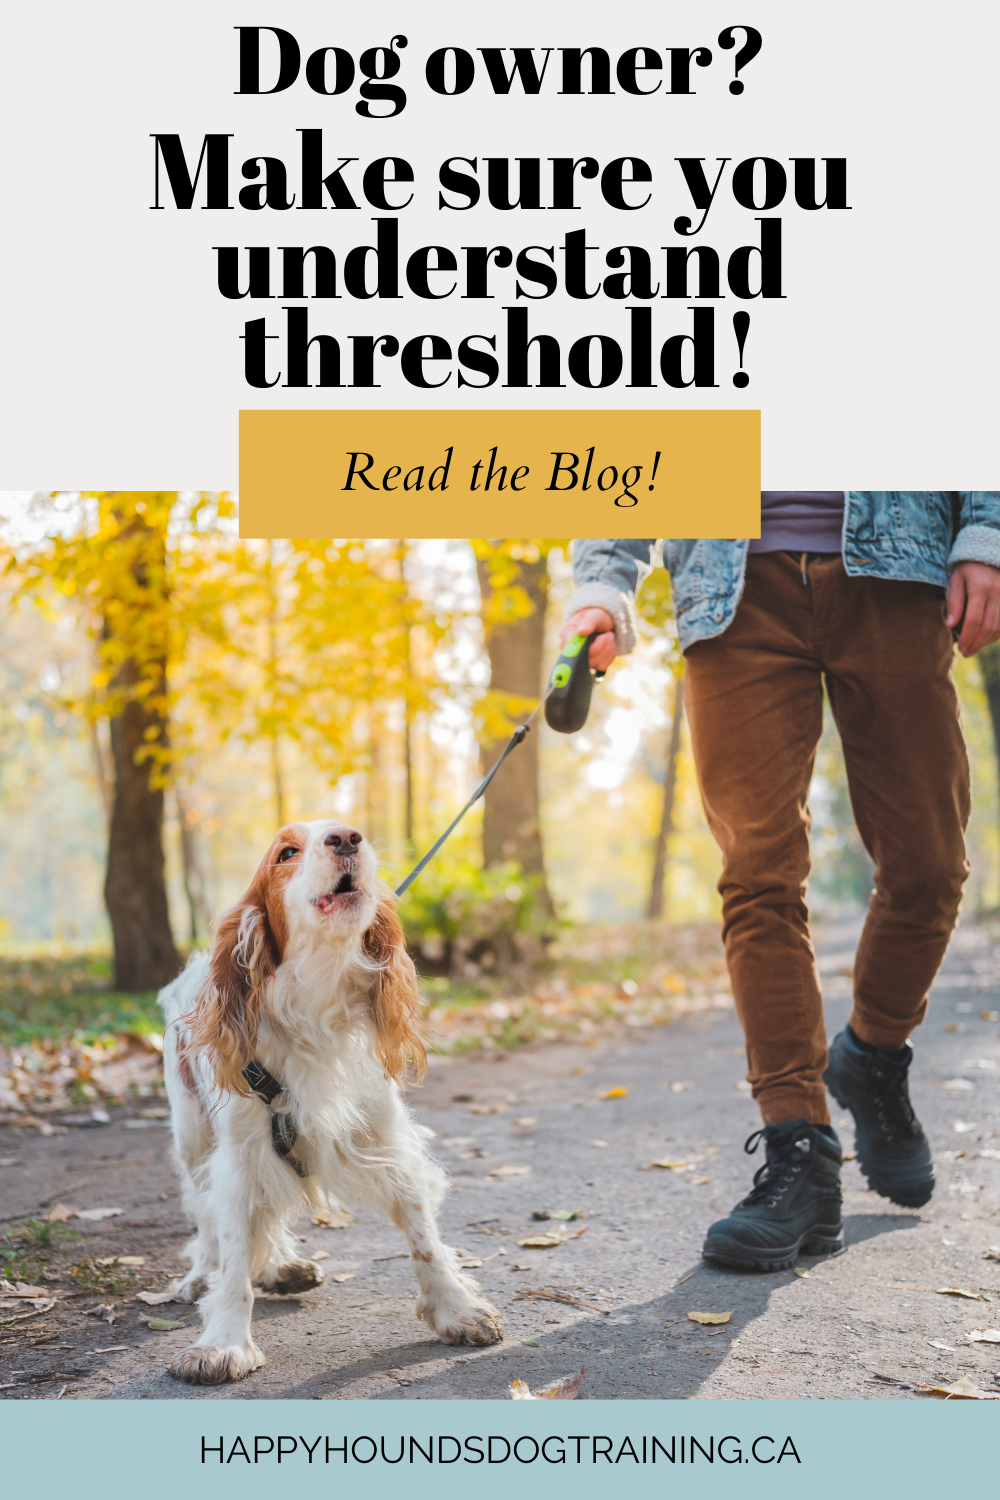 What is a dog's threshold